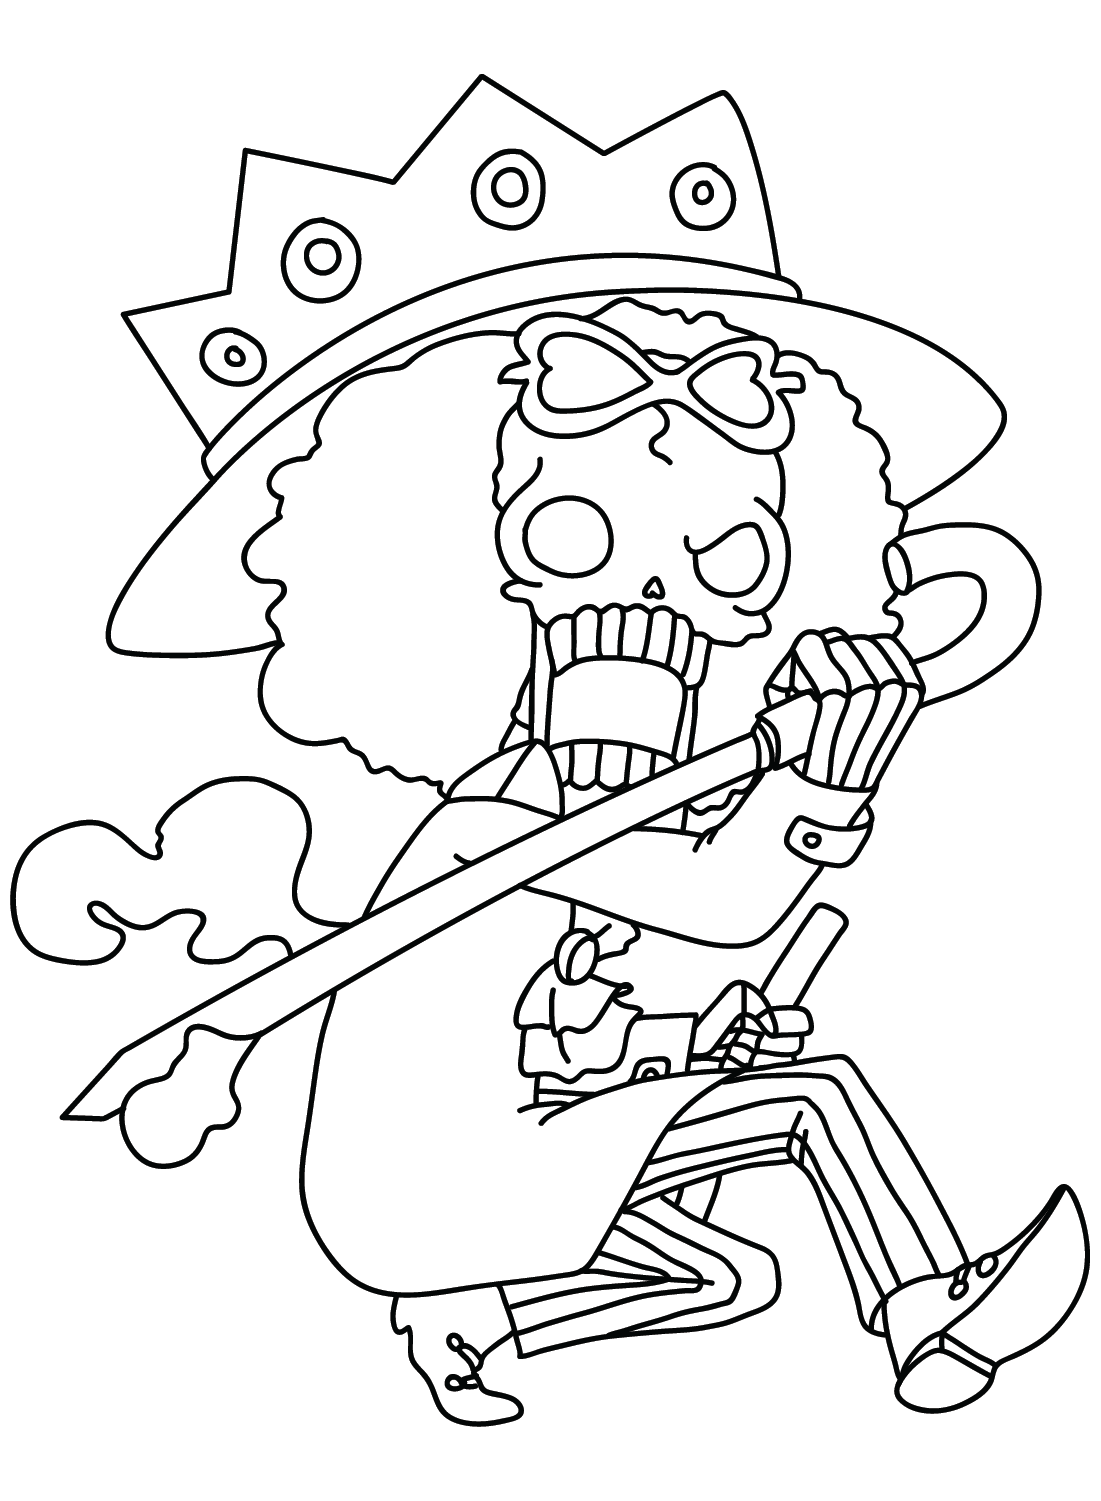 Brook Coloring Page PDF from Brook